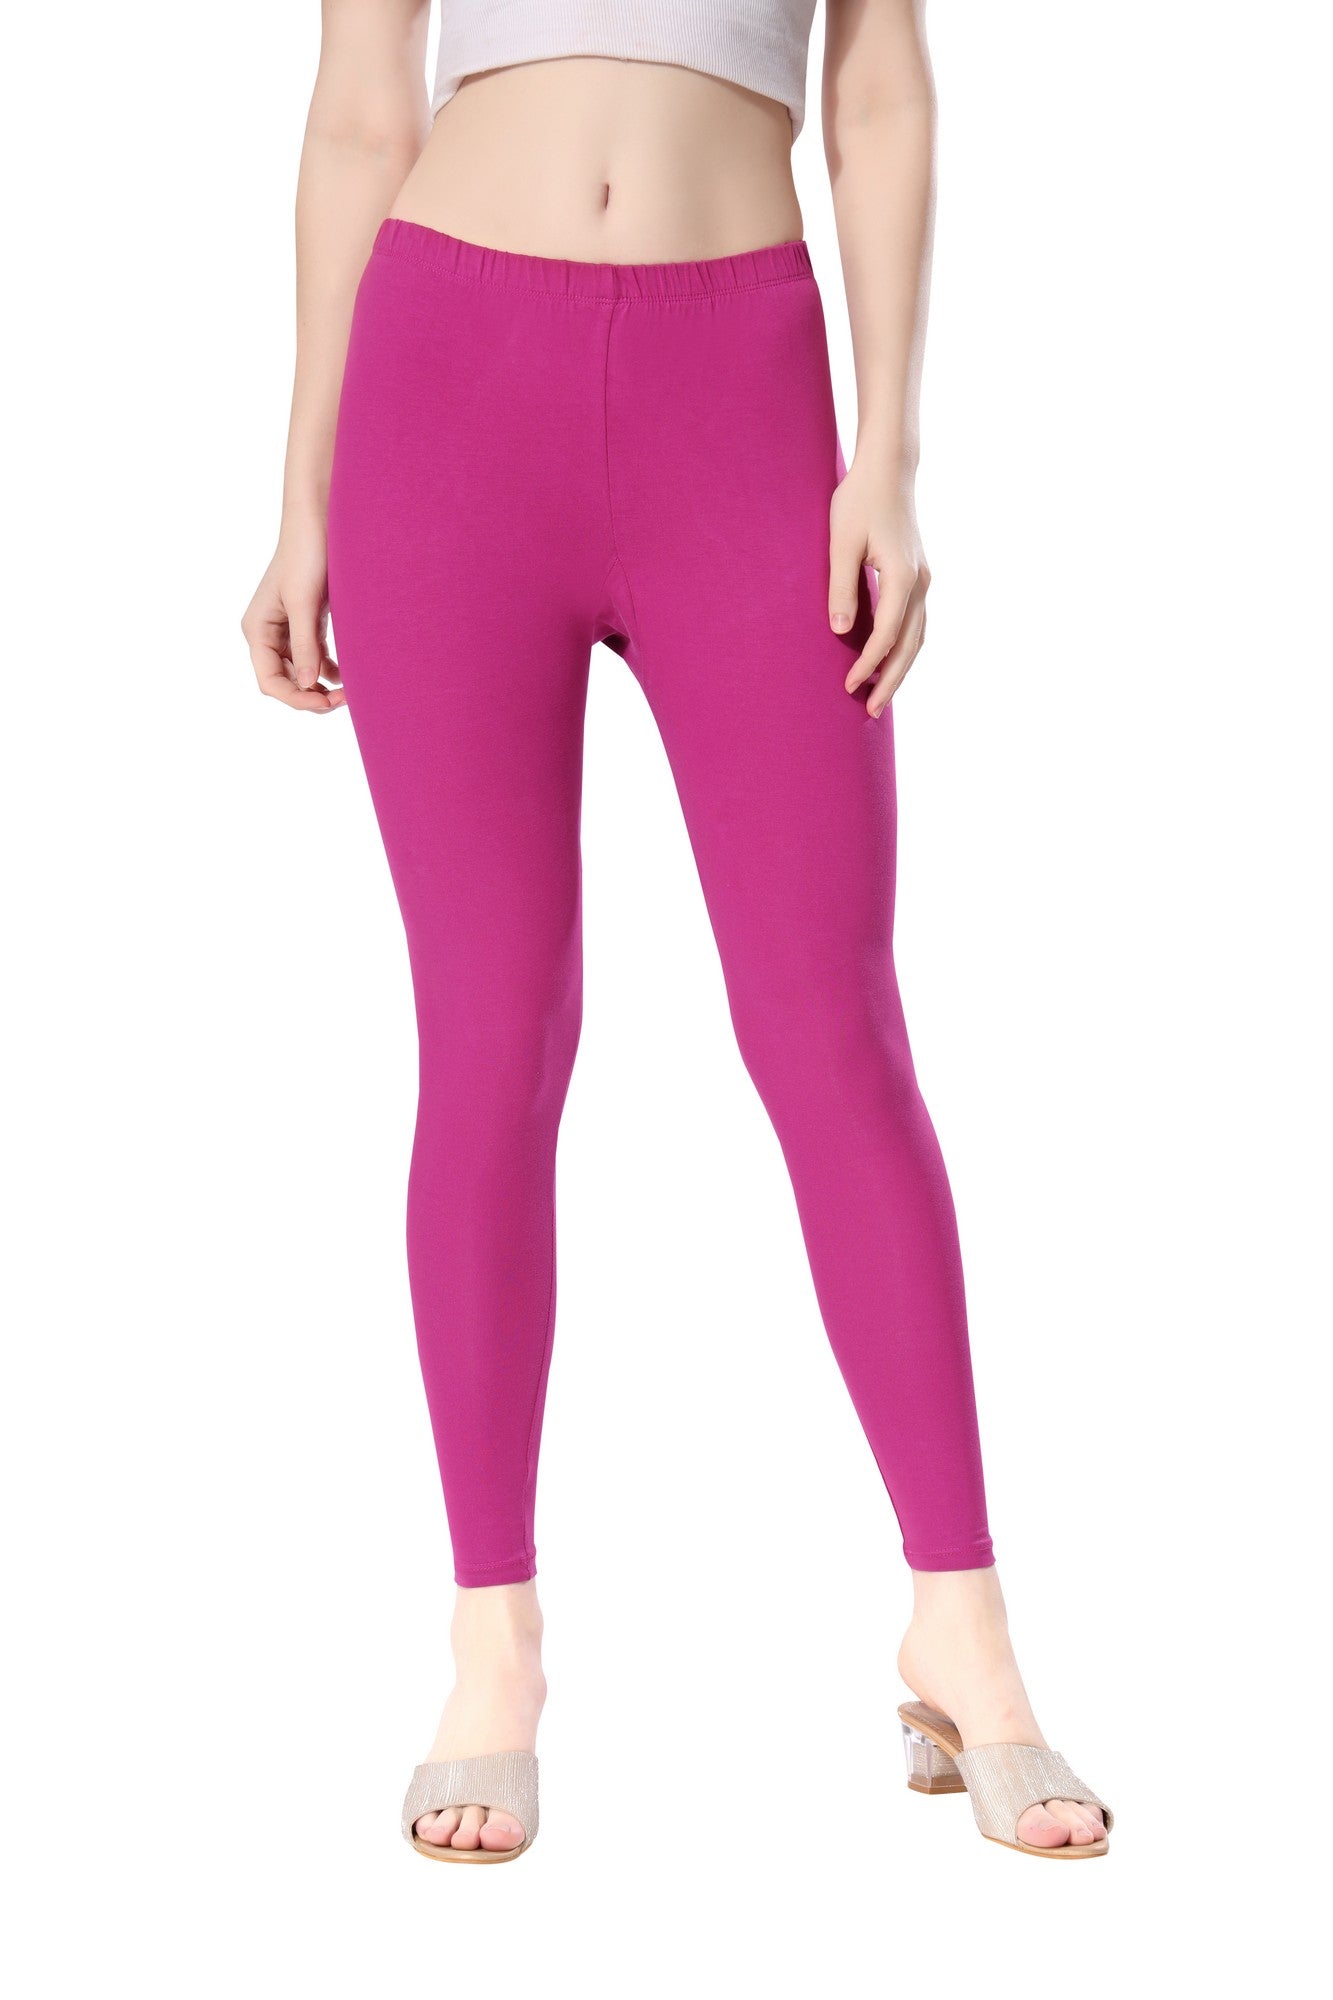 COMFORT LADY 200 Colours Available Ankle Length Leggings Size Free